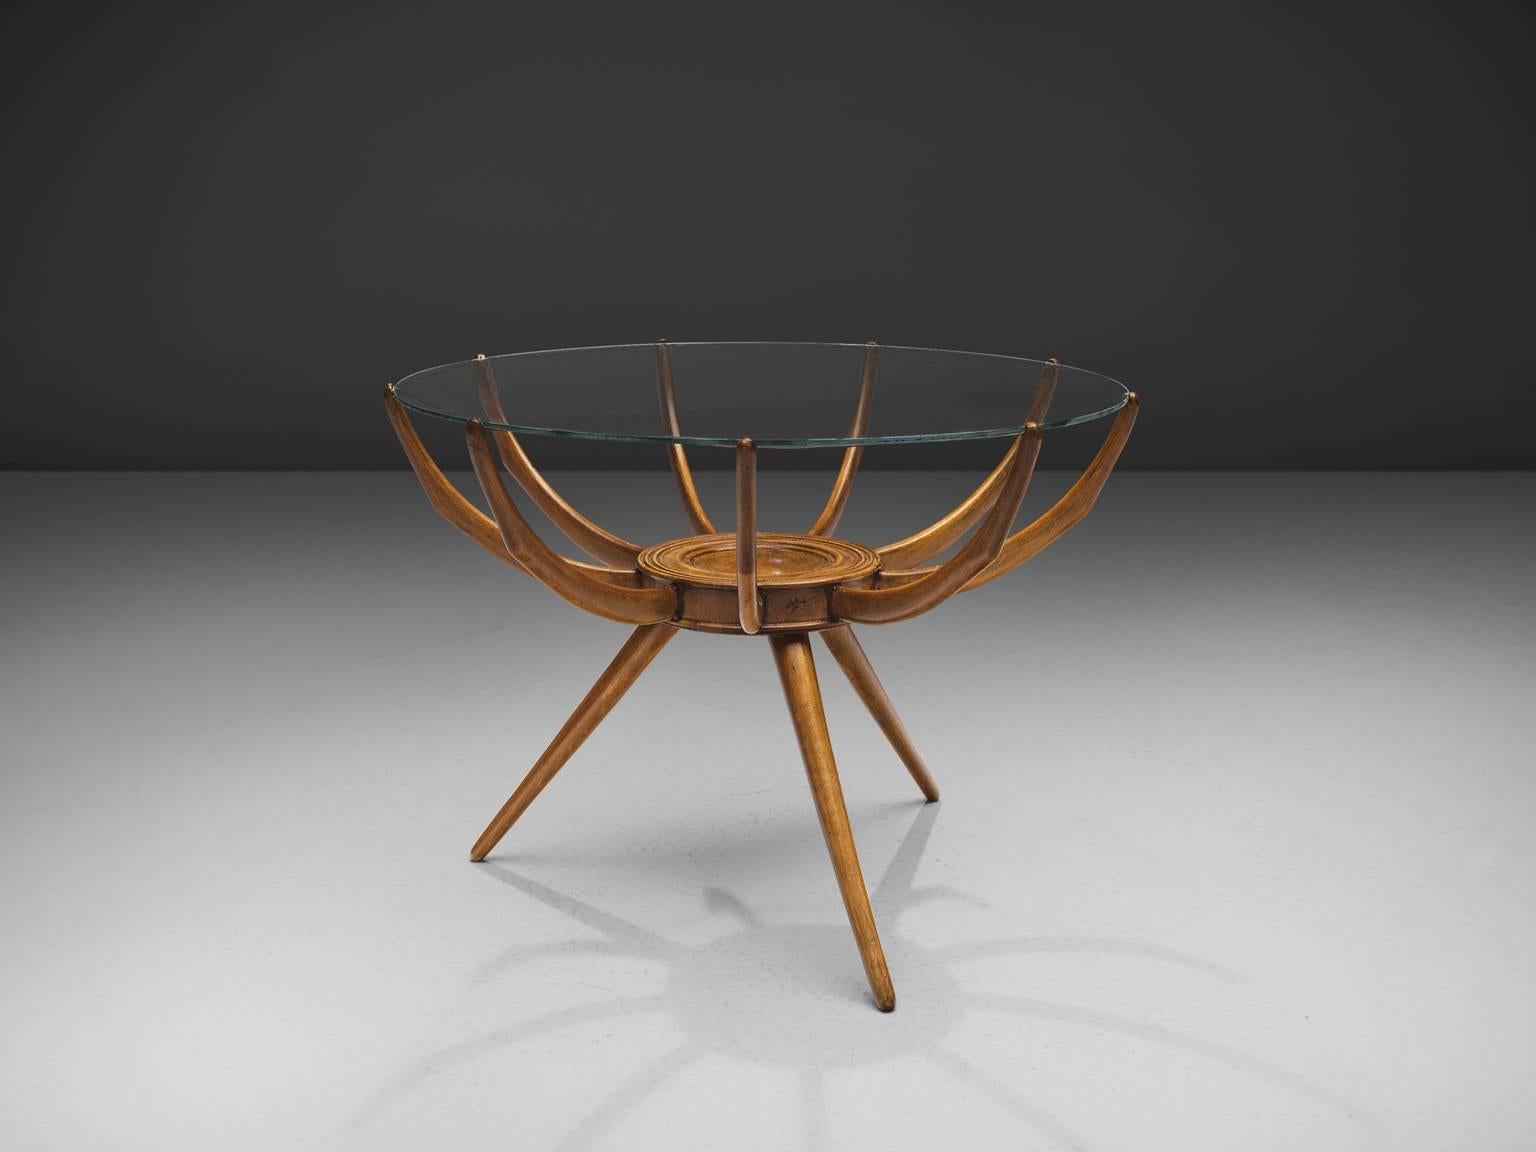 Carlo de Carli, Renato G. Angeli, and Luigi Claudio Olivier, coffee table, Italy, 1950s.

This is medium size coffee table is made out of beech wood, glass and metal. The top of the table is gently placed on the wooden arms which connect to the